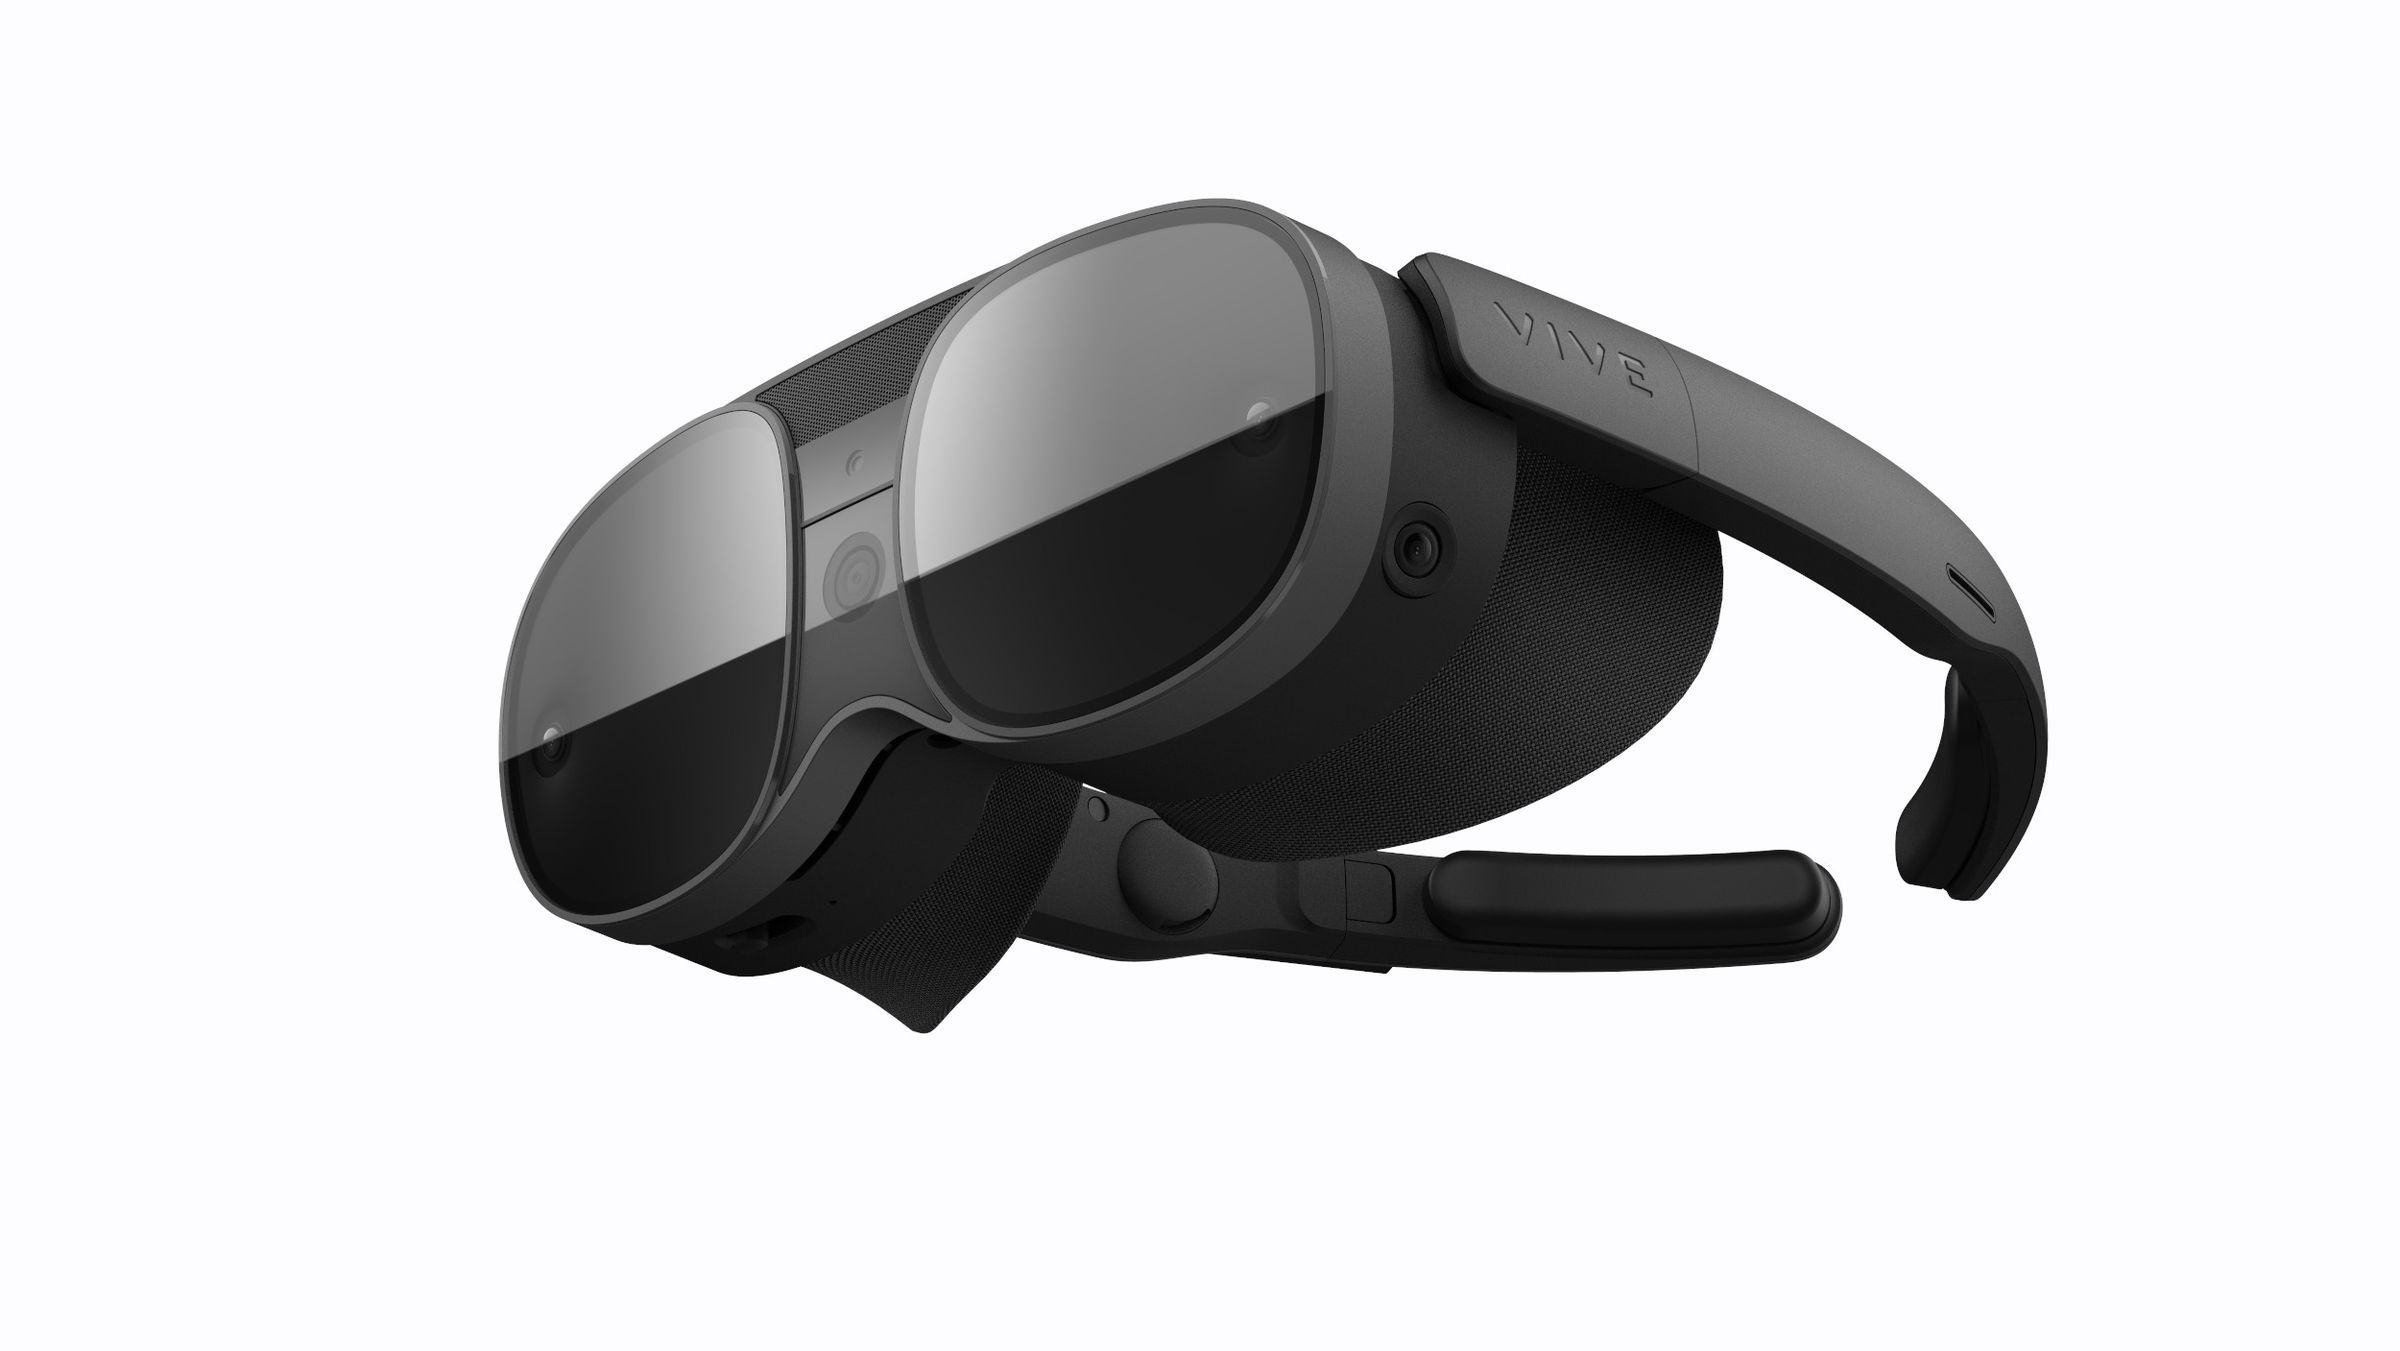 A black VR headset with glasses-style earpieces.